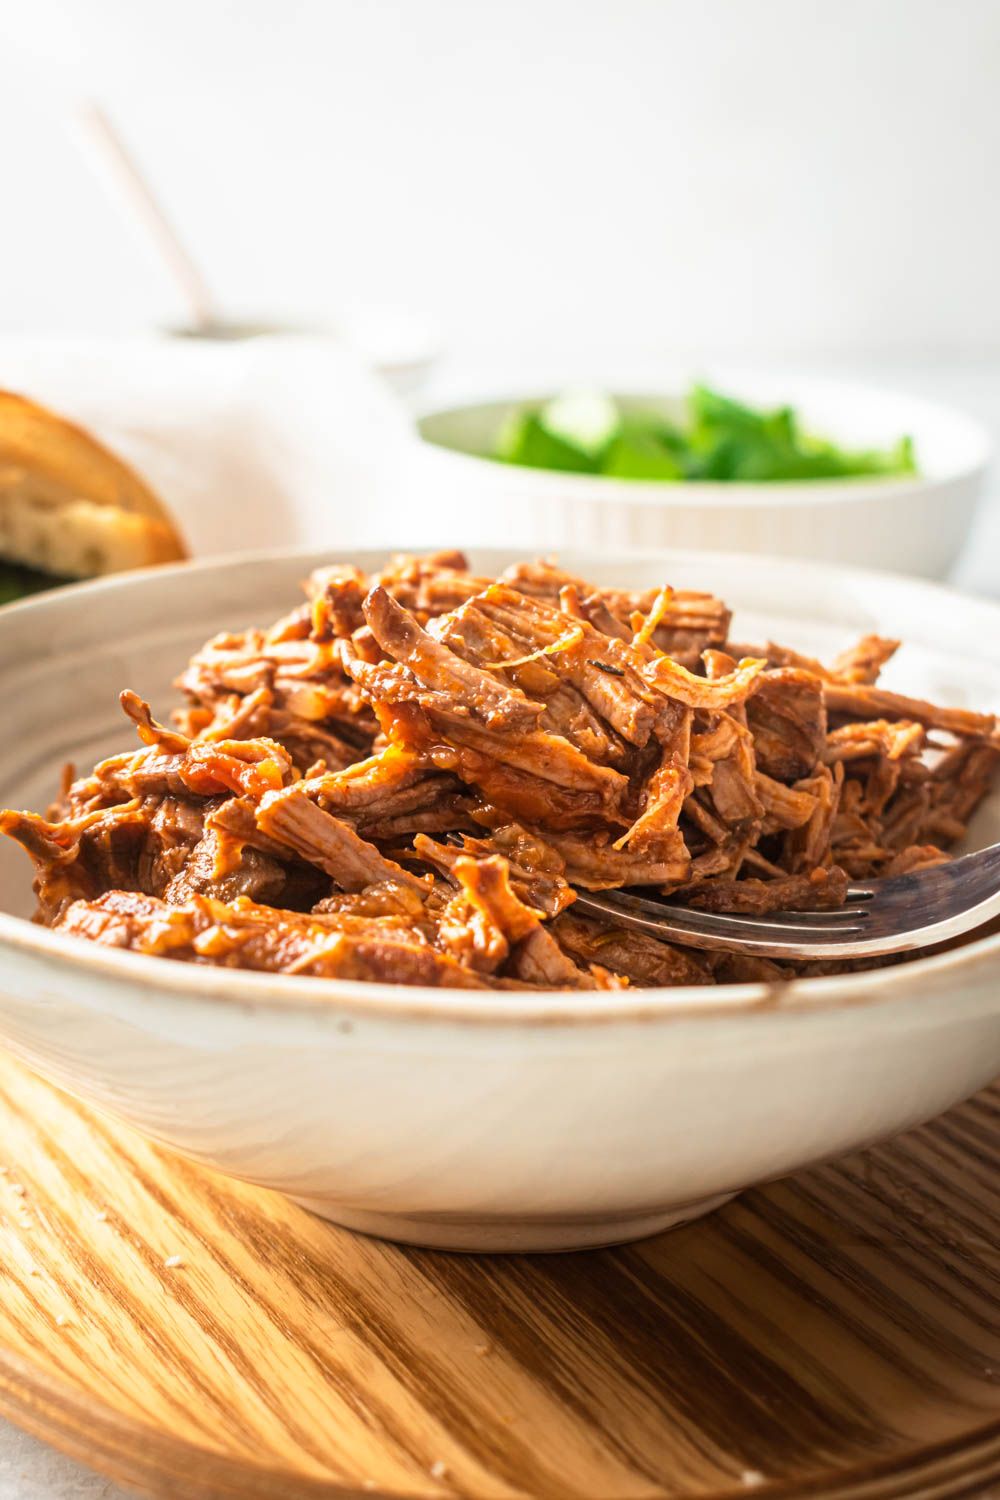 Crockpot Italian shredded beef served in a white bowl with a tomato and red wine sauce.